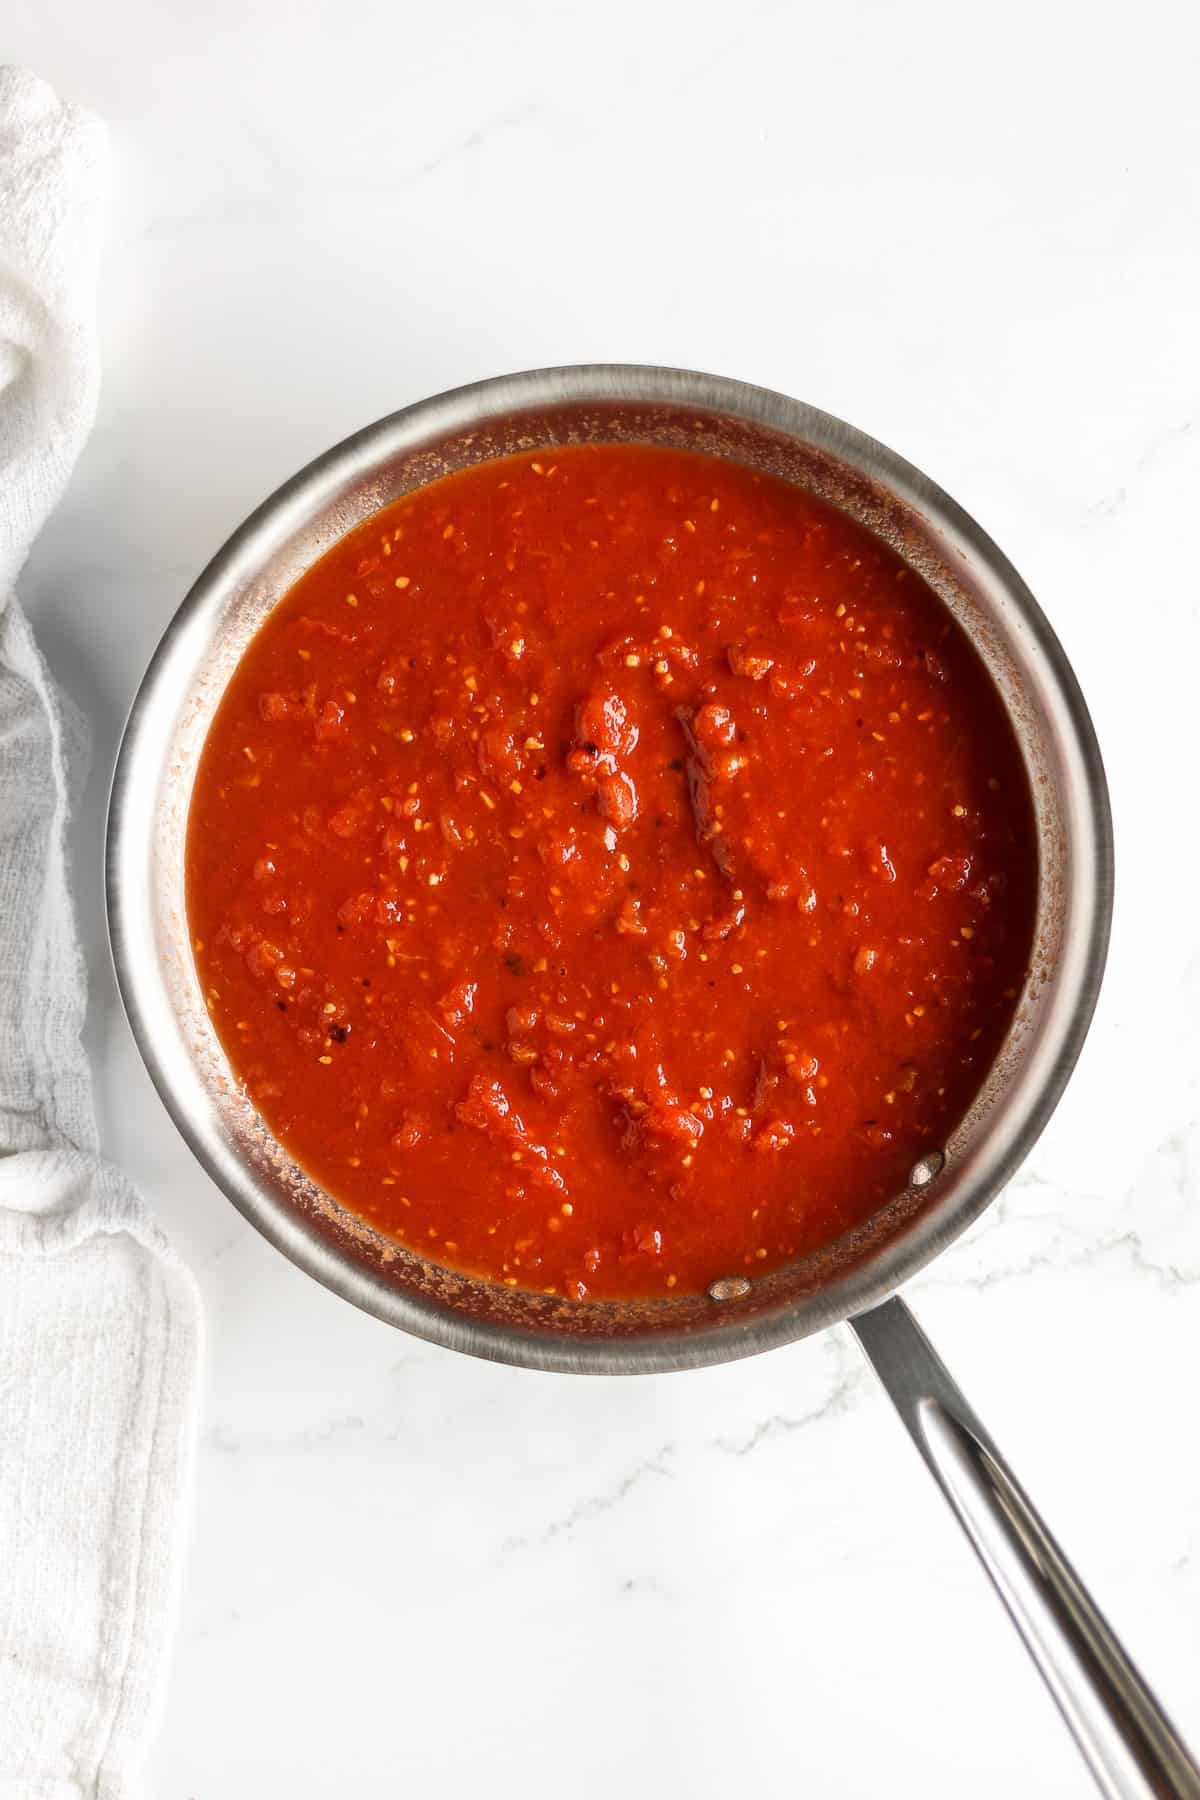 Sauce with crushed tomatoes.